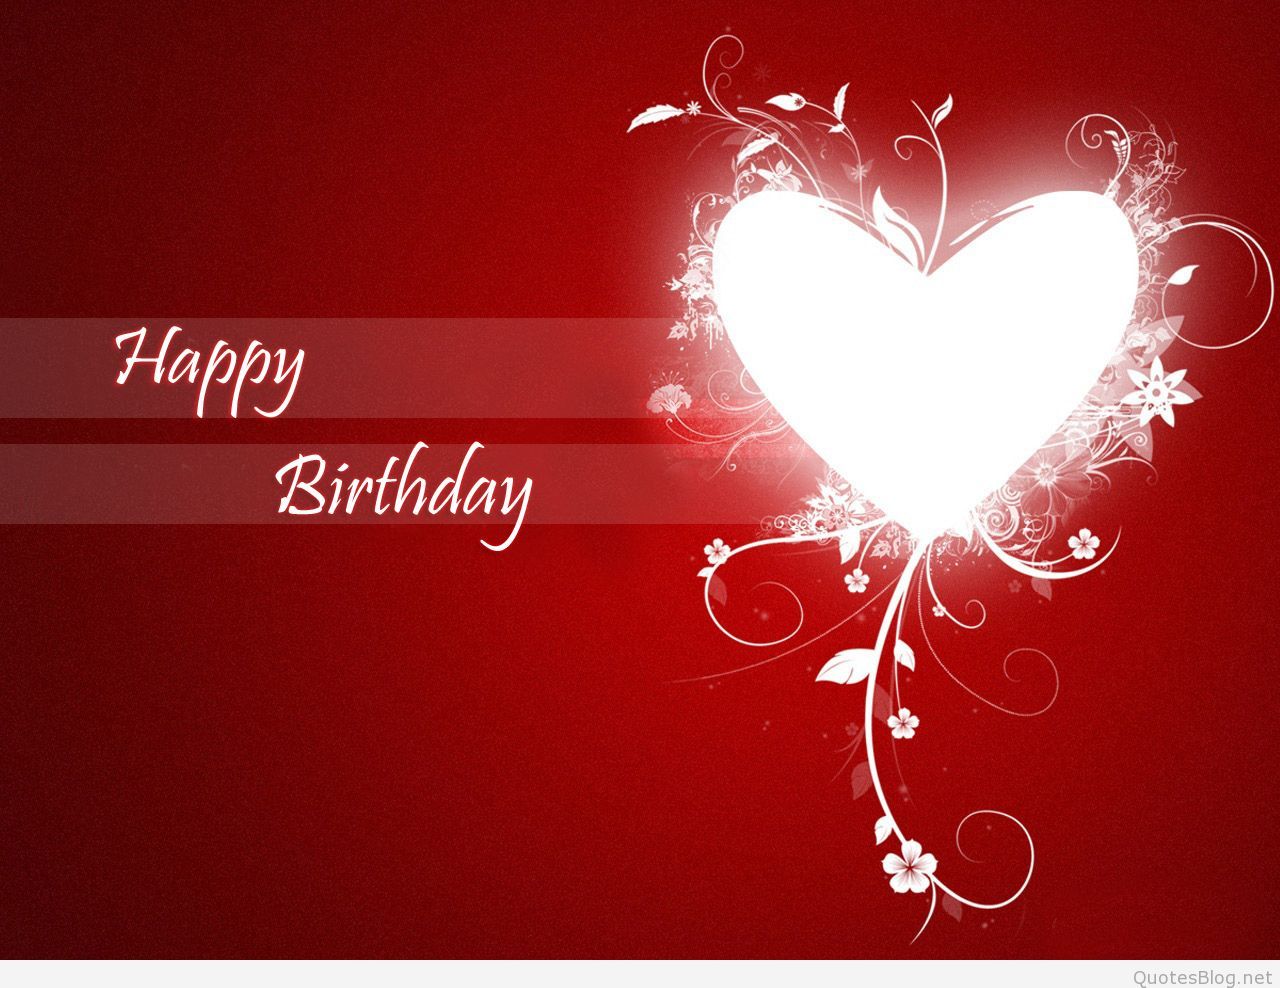 birthday wallpaper with quotes,heart,love,text,red,valentine's day